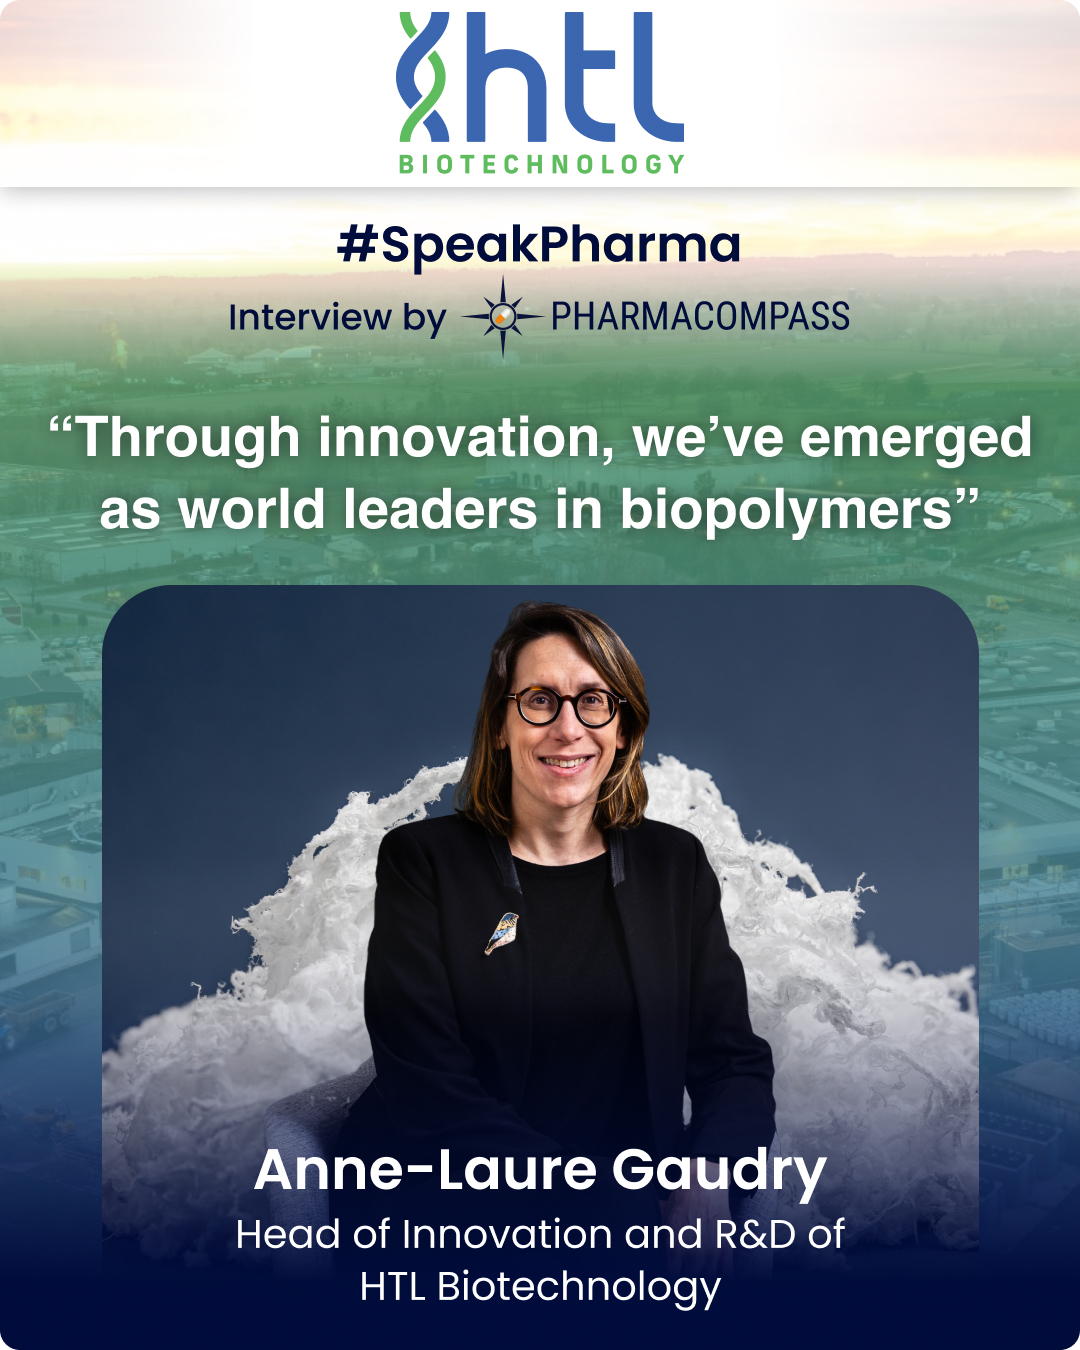 “Through innovation, we’ve emerged as world leaders in biopolymers”